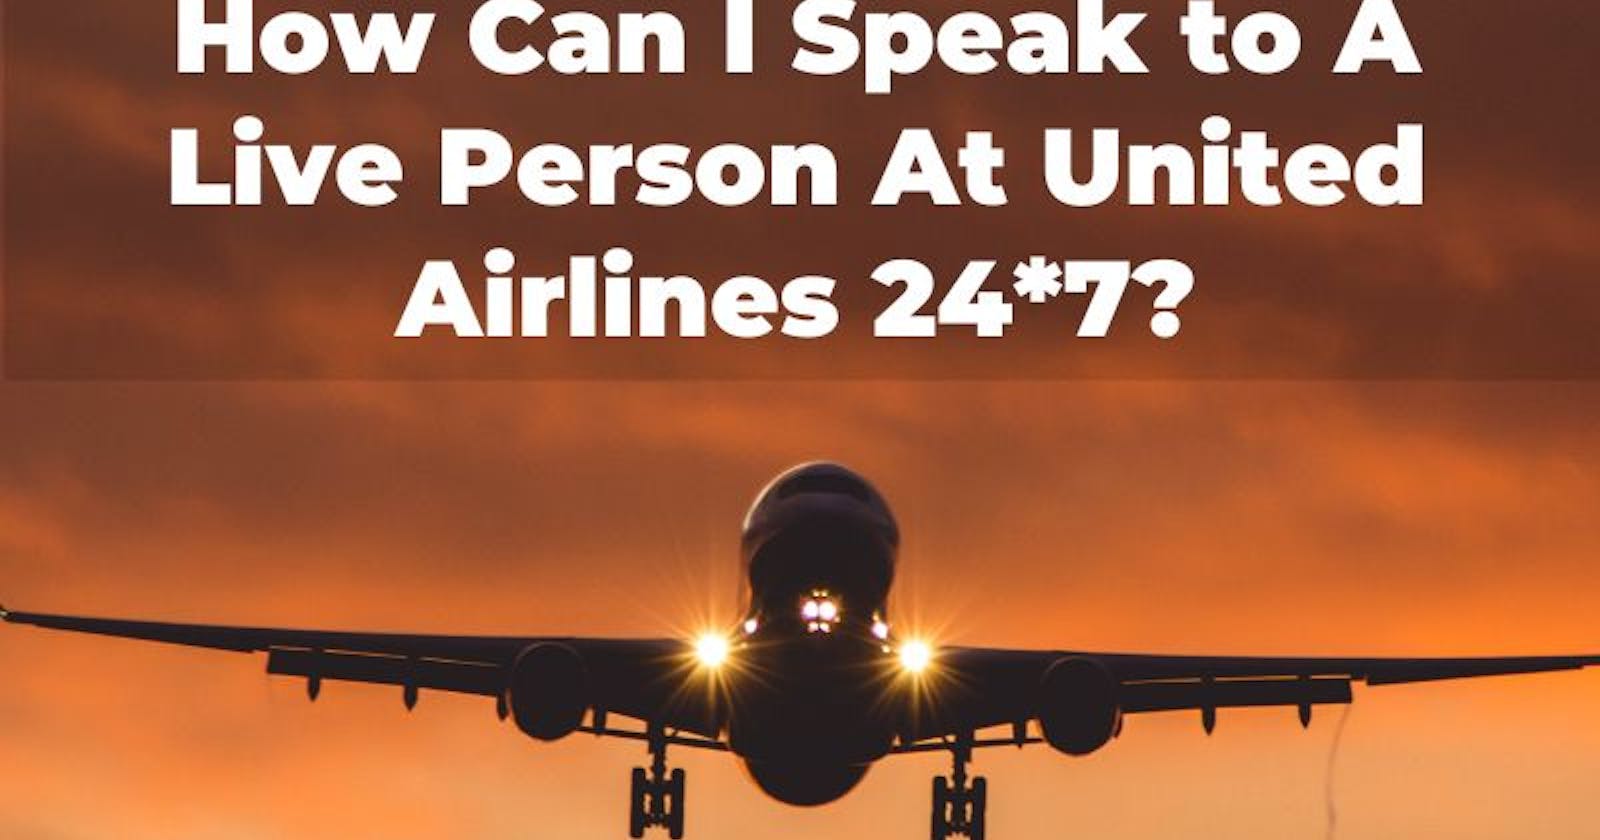 How Can I Speak to A Live Person At United Airlines 24*7?